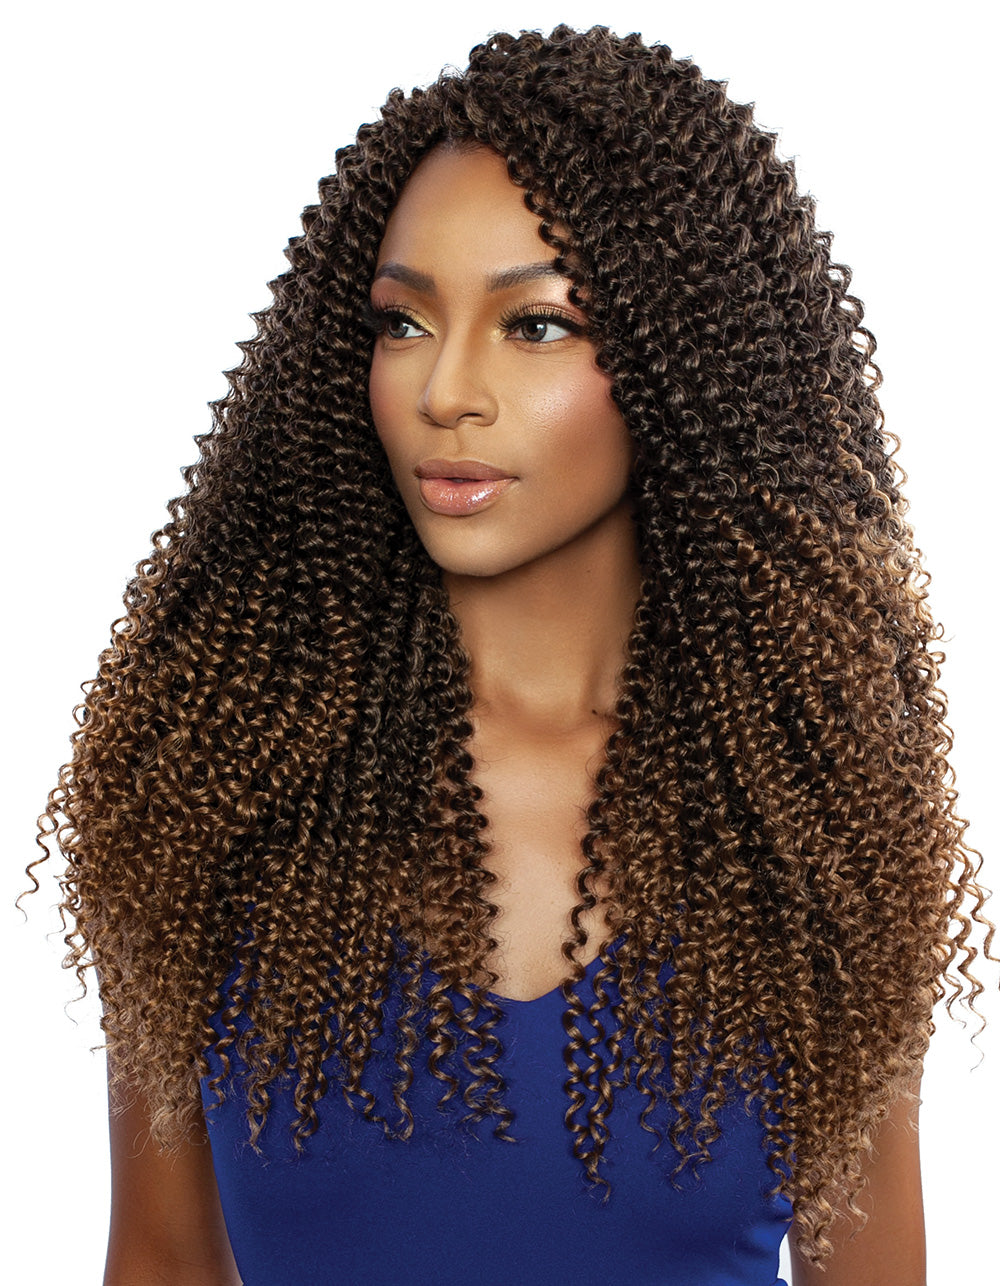 coconut oil to moisturize locs and natural hair – Beauty Coliseum